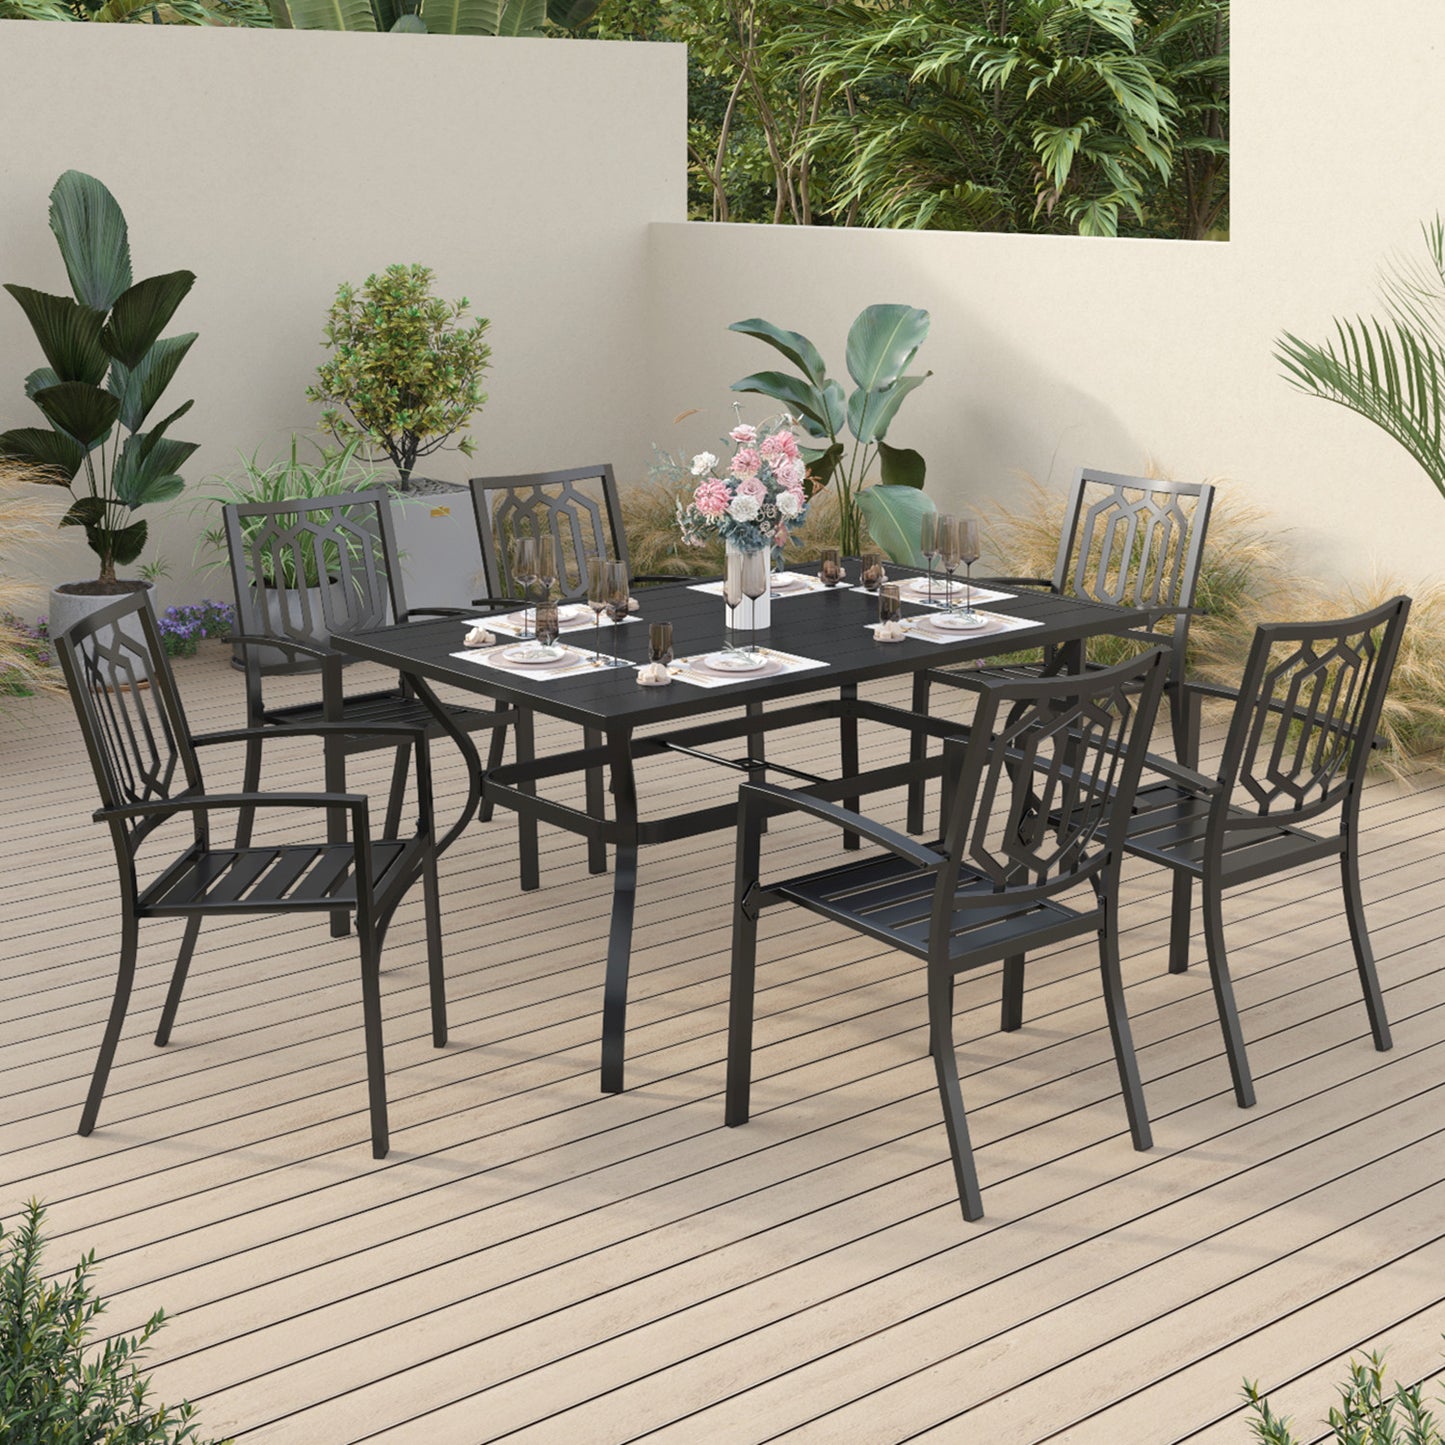 Sophia & William 7 Piece Metal Outdoor Patio Dining Bistro Sets Kitchen Dining Table Sets with 6 Stackable Metal Chairs and 60" x 38"x28" Steel Frame Slat Rectangular Table,Black